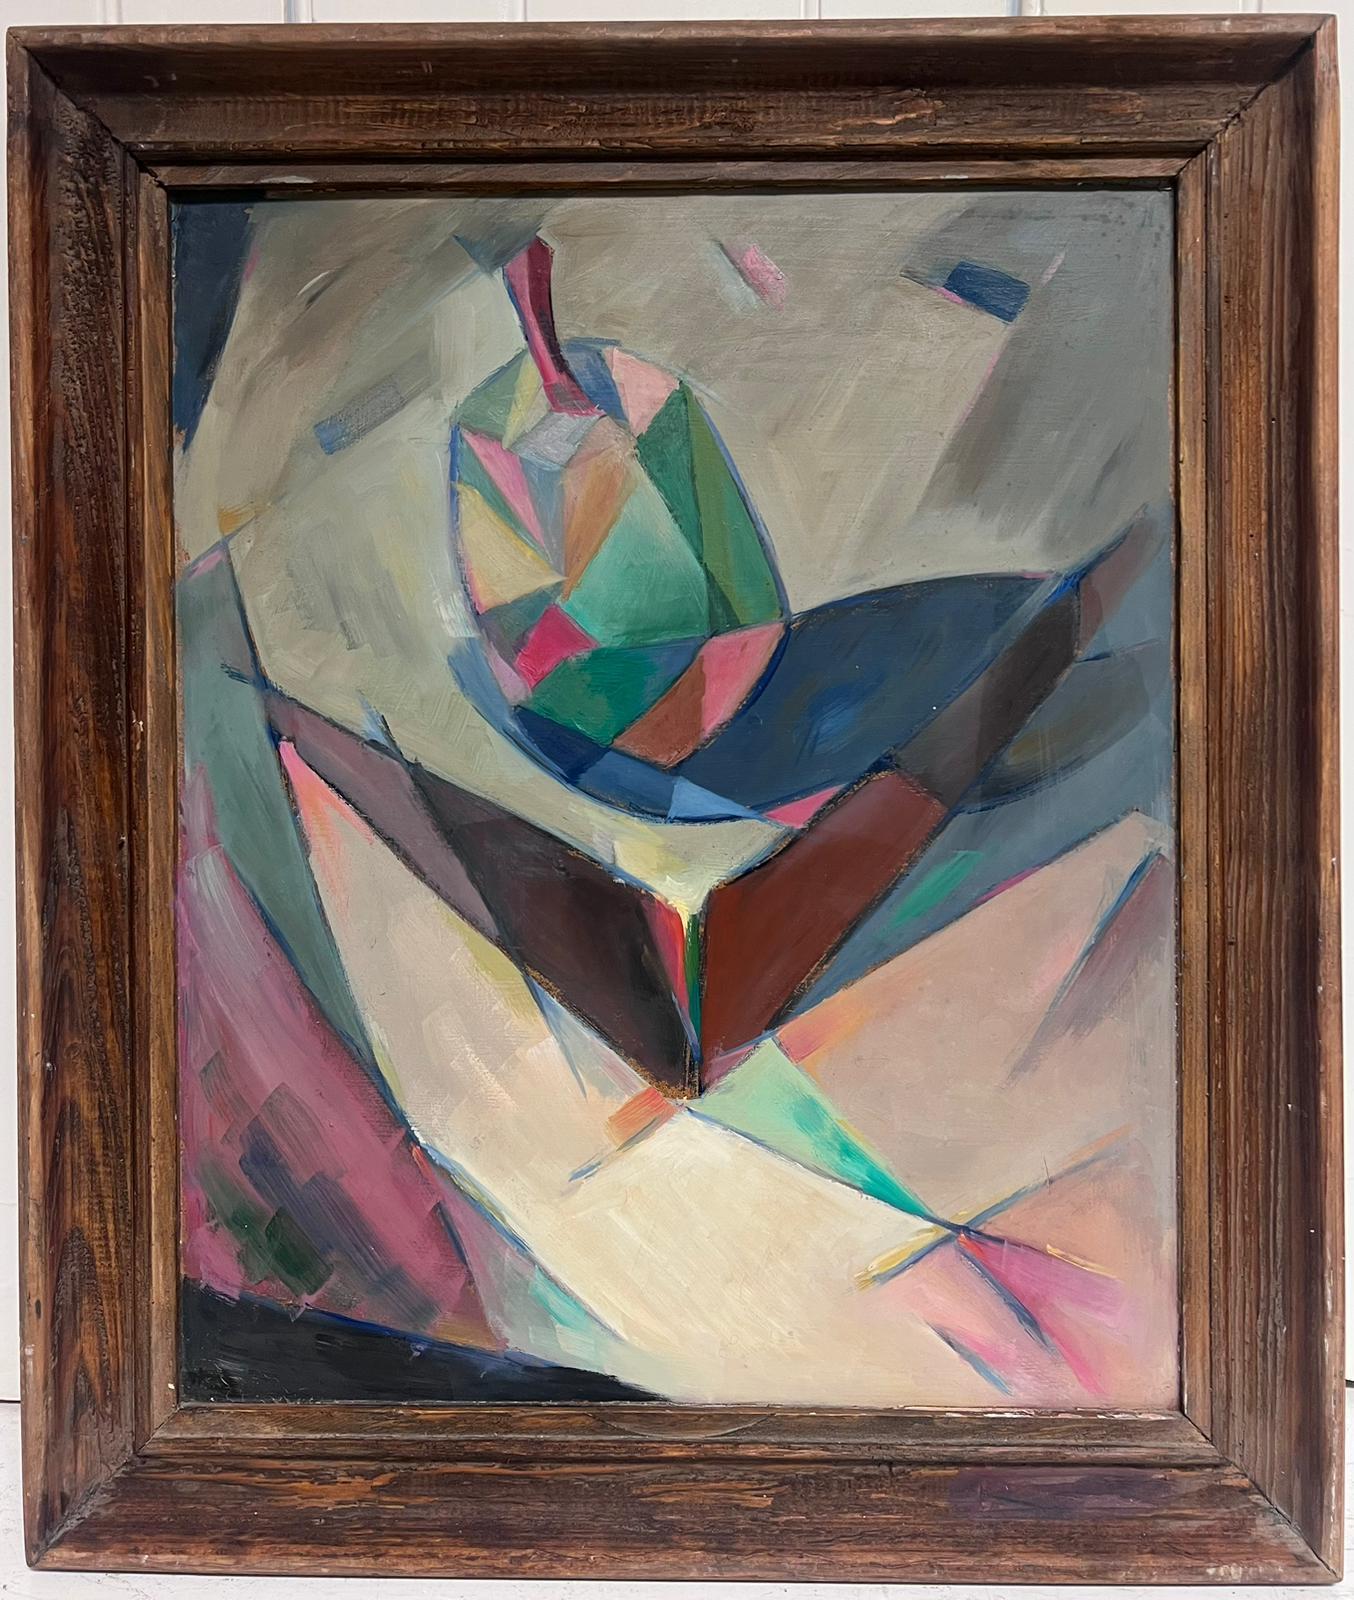 Cubist Still Life
by Paul-Louis Bolot (French 1918-2003)
oil on board, framed
signed and dated 1981 verso
framed: 21.5 x 18 inches
board: 18 x 15 inches
original oil painting
condition: very good and sound
provenance: all the paintings we have by